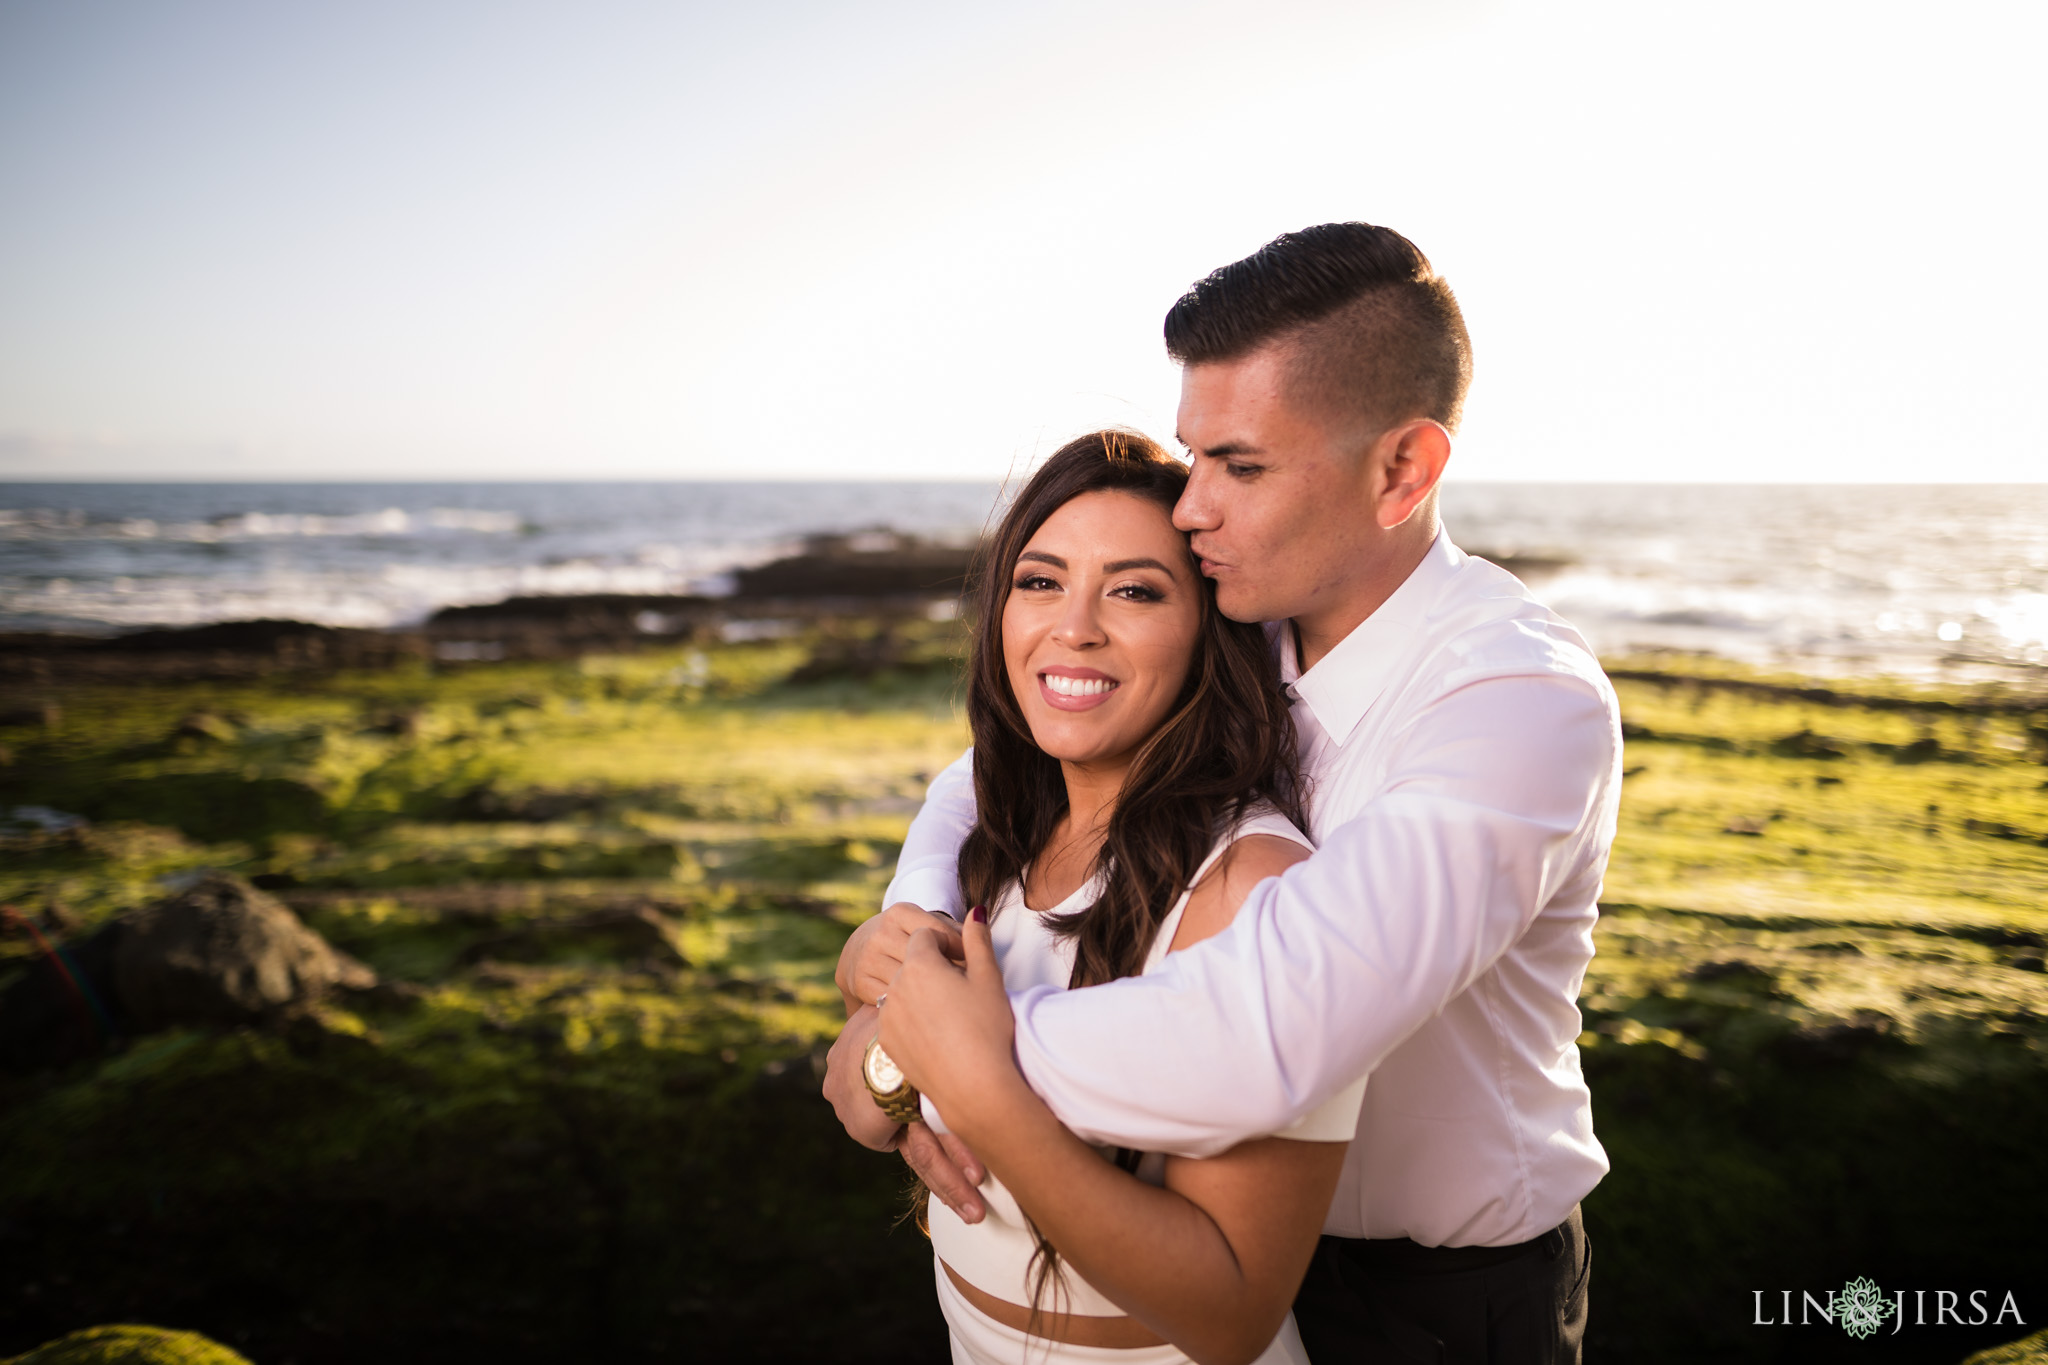 08-james-dilley-orange-county-beach-engagement-photography